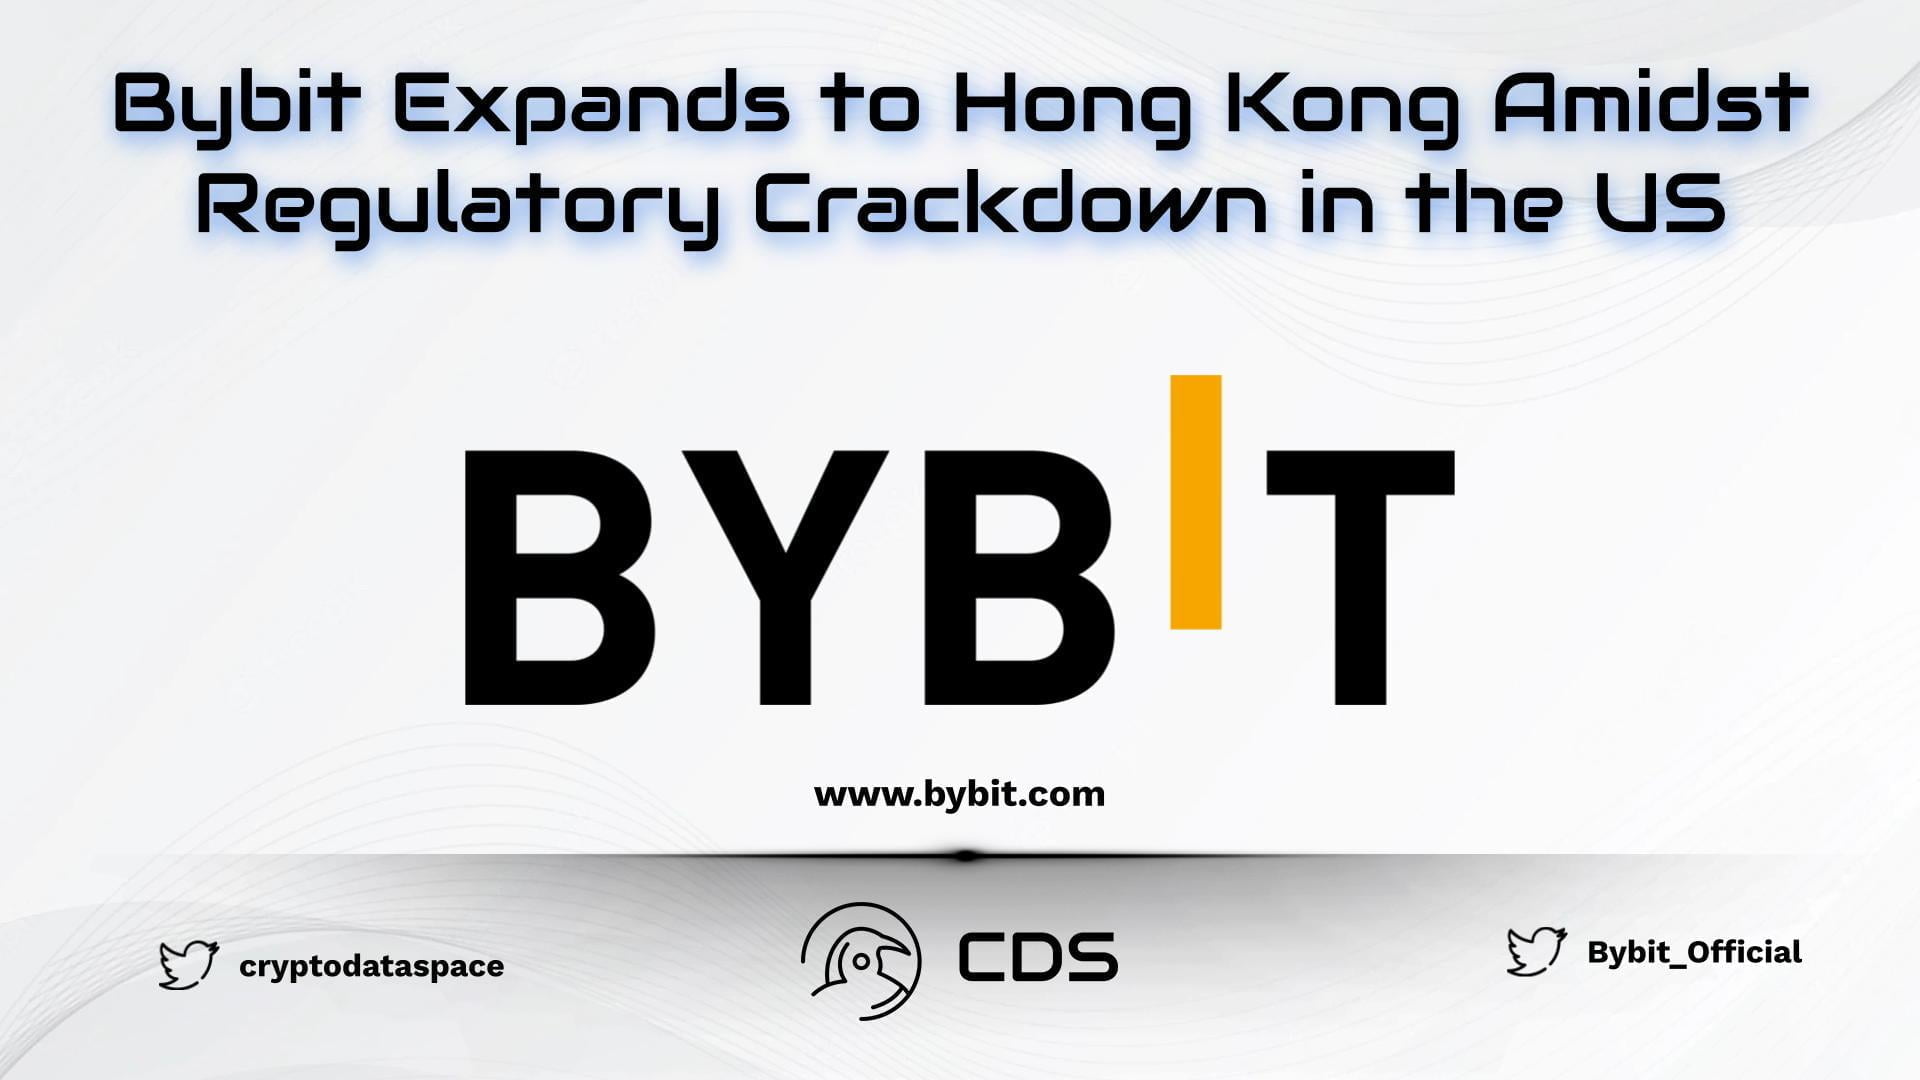 Bybit Expands to Hong Kong Amidst Regulatory Crackdown in the US